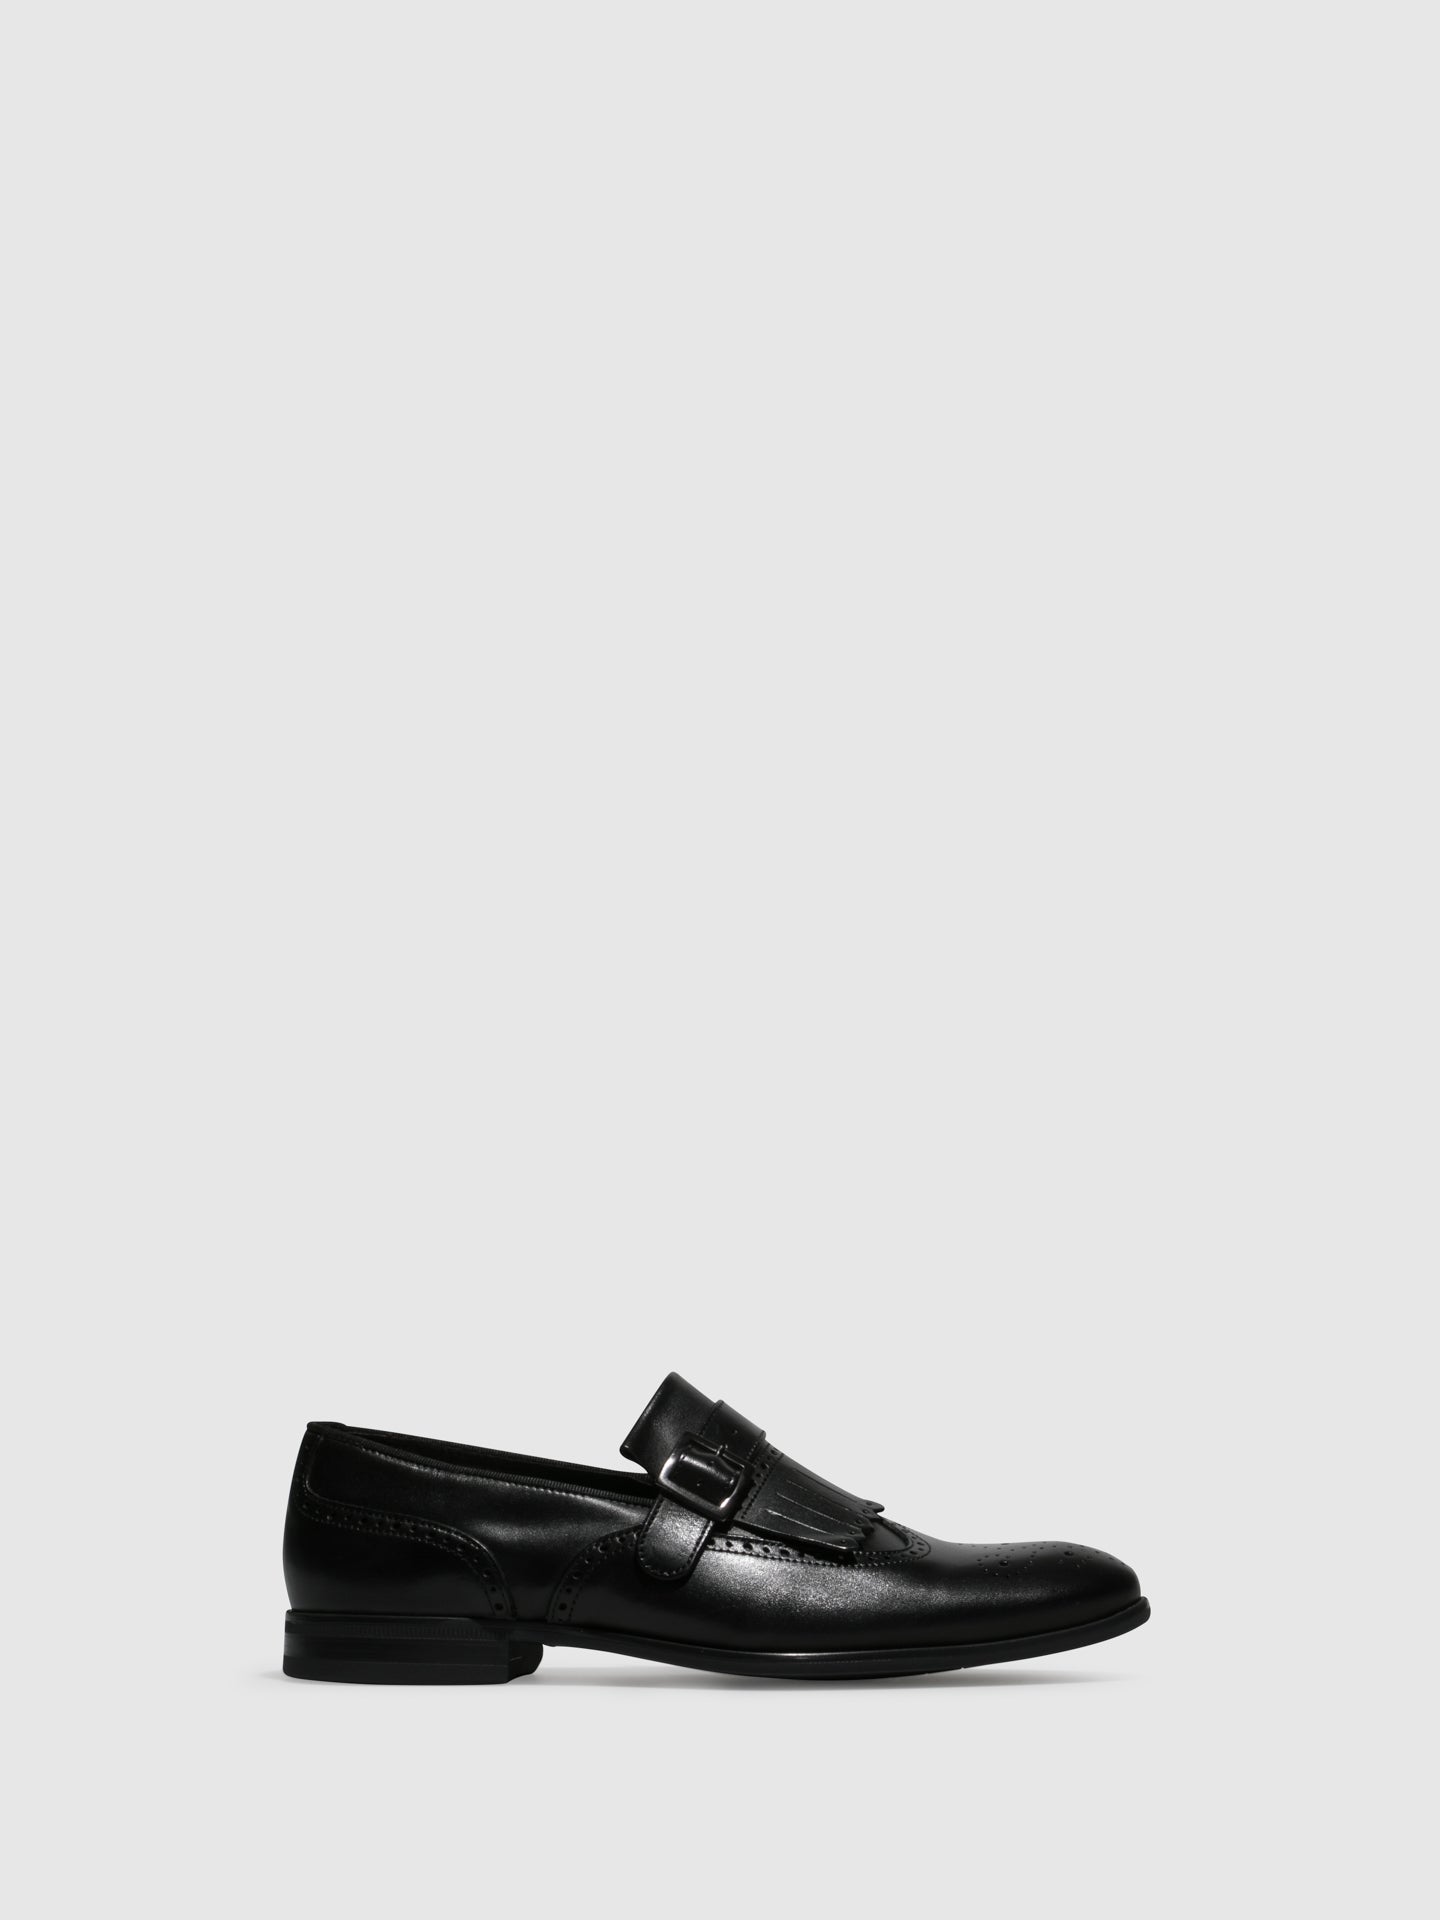 Foreva Black Buckle Shoes